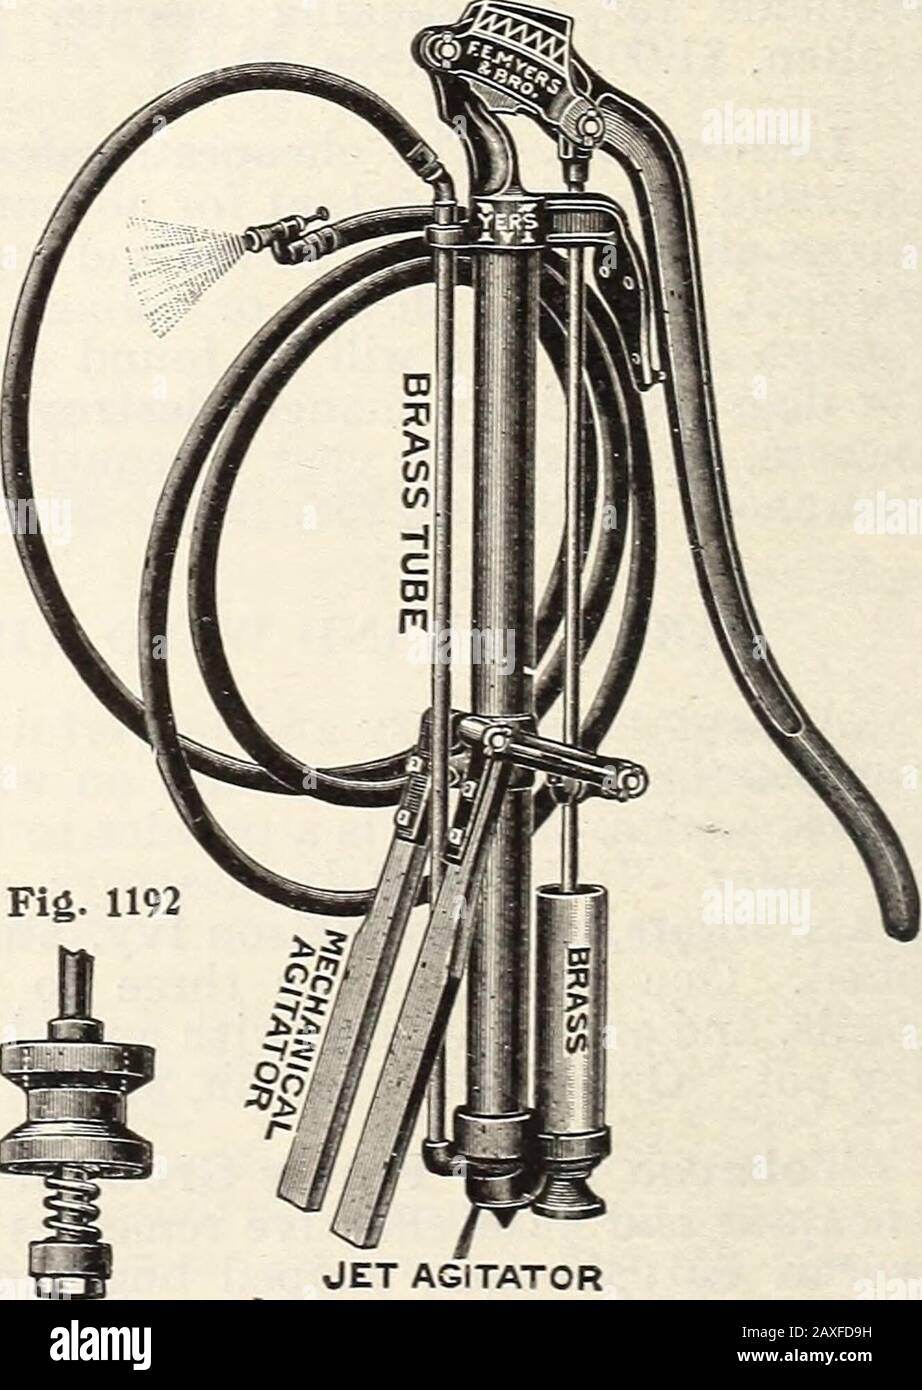 Mann's descriptive catalgoue : 1914 guide for the farm and garden . Myers Imperial BrassSpray Pumps This Spray Pump is constructed entirely of brass, a material thatis not affected by the poisonous arsenites used in different formulae forspraying fruit trees, vines and shrubbery. It is so arranged that thelabor of pumping is all done on the downward stroke of the piston andnothing on the up. The effect of this operation while pumping is to holdthe pump down. The foot rest steadies the pump, holding it in theproper position. No. 327£, Fig. 639. j Price, with 3-ft. Rubber Hose S3.50 Price, with Stock Photo